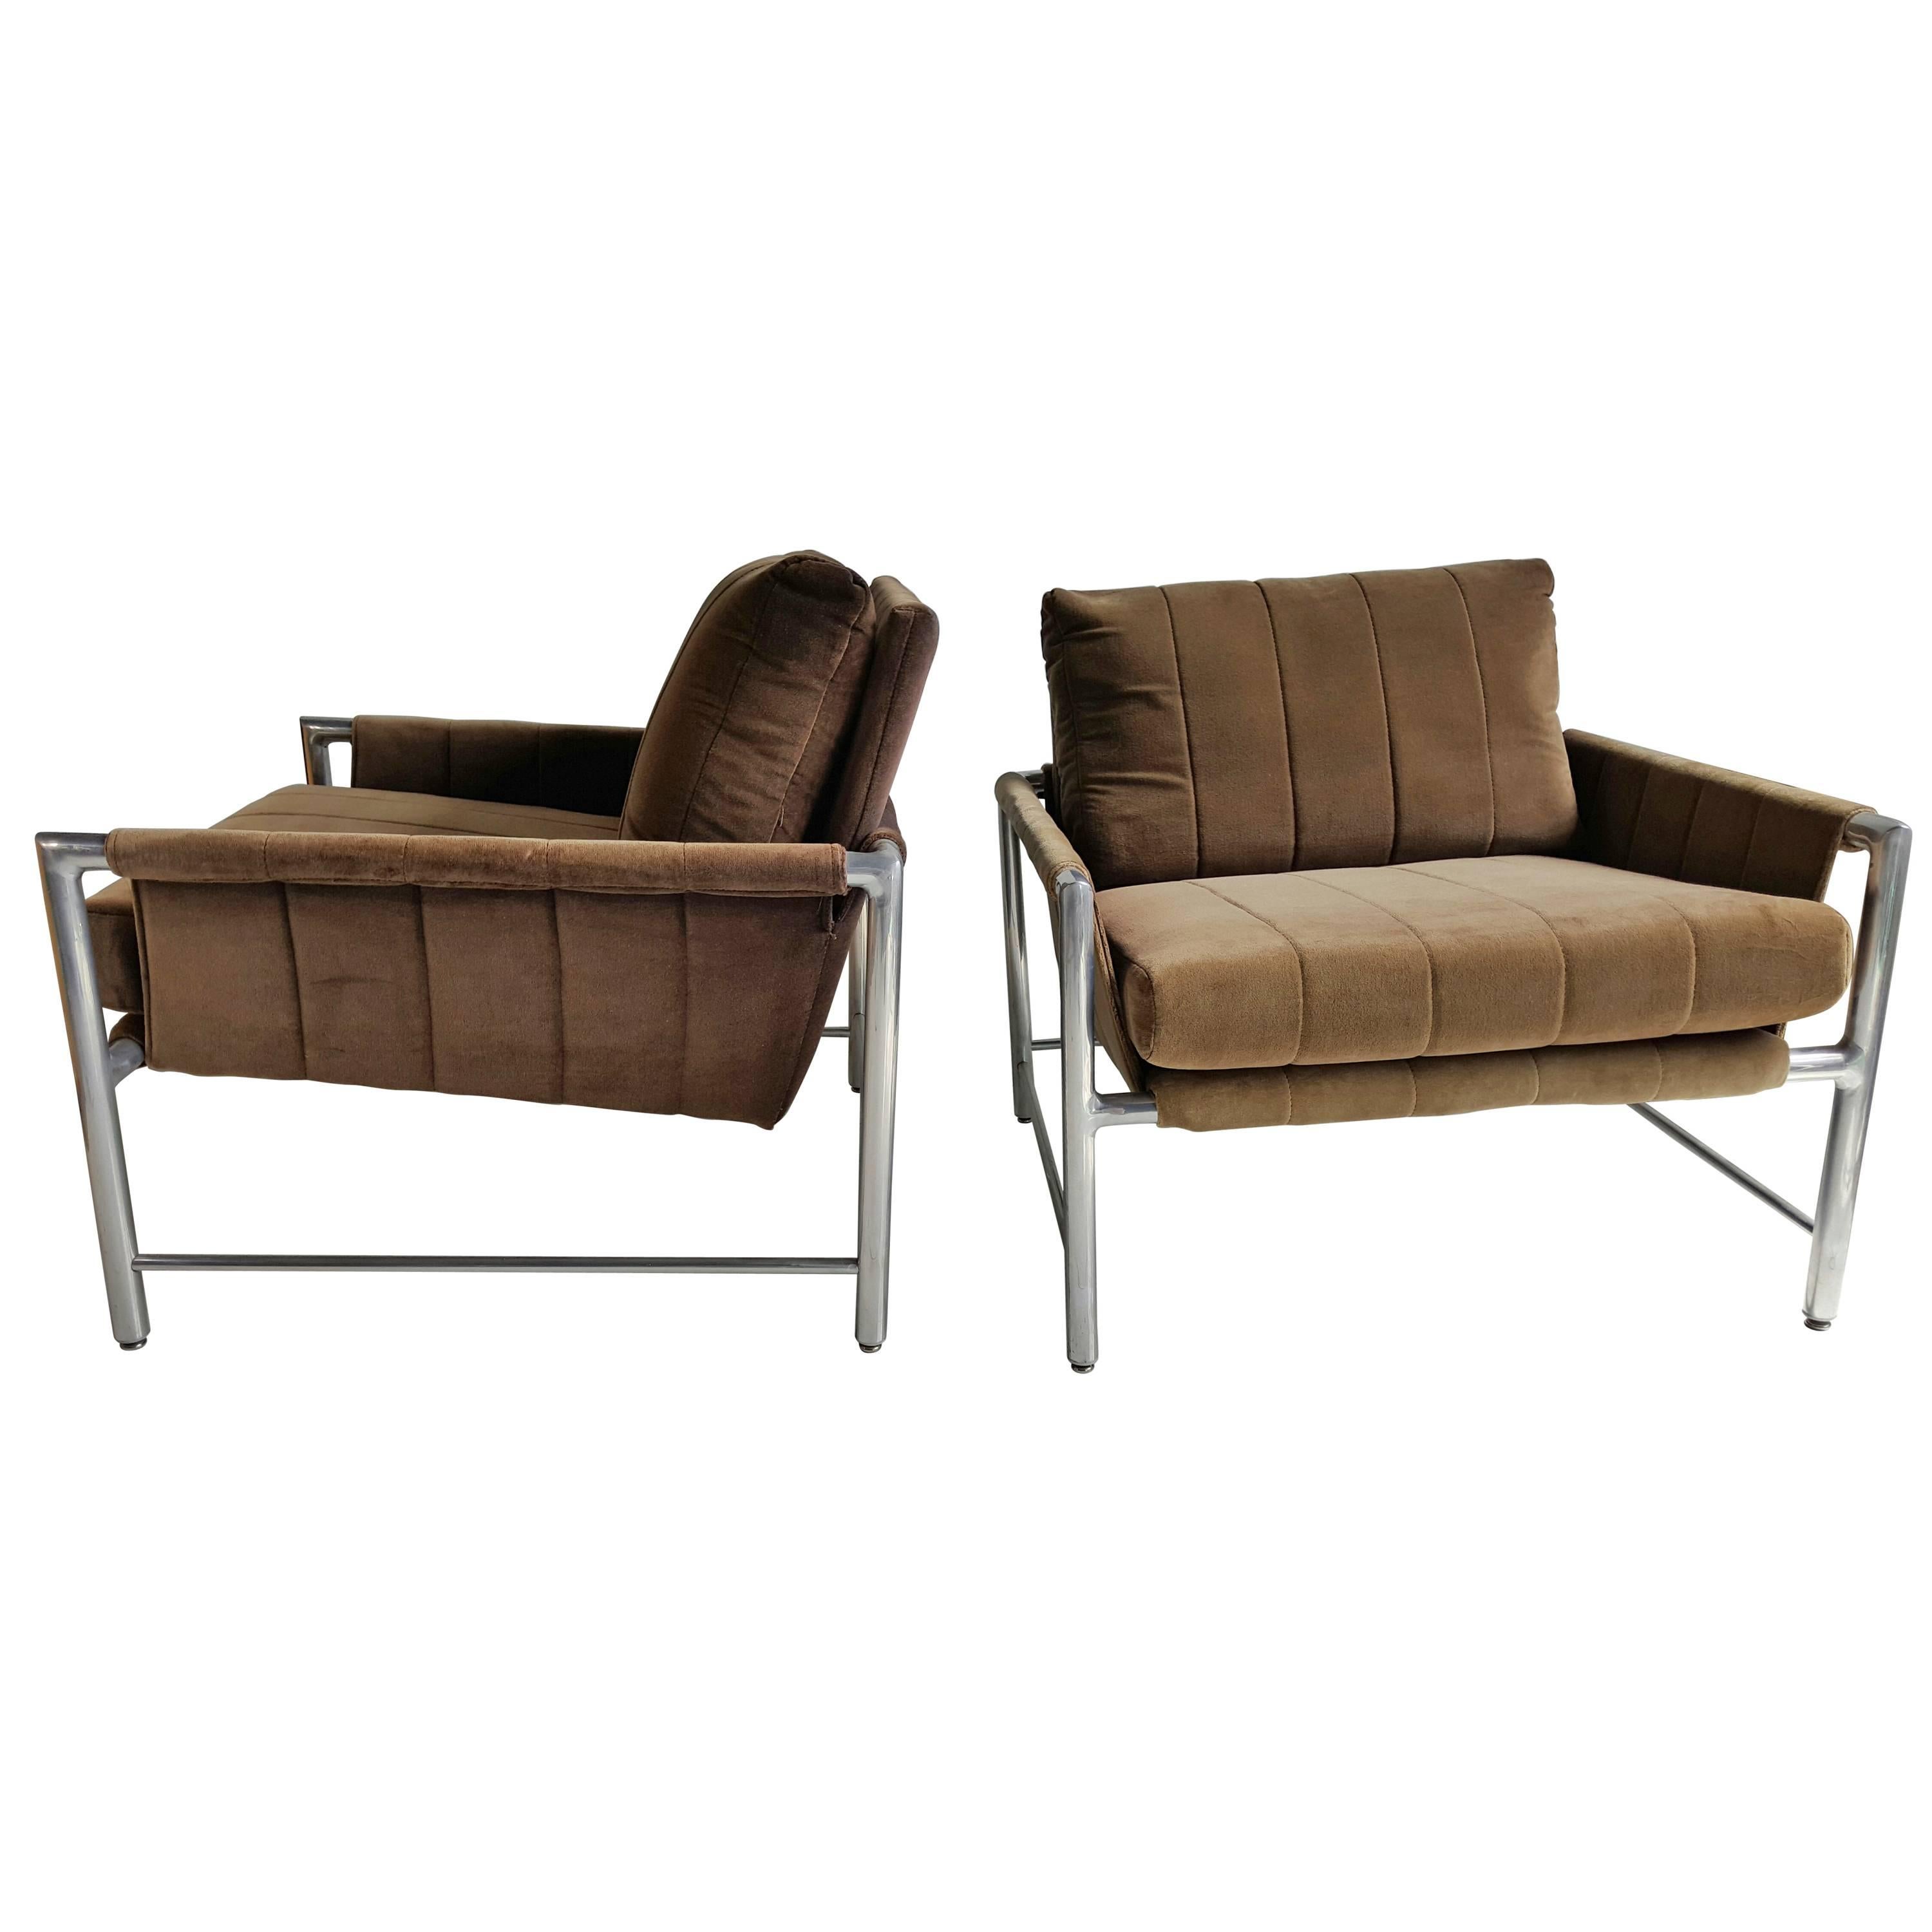 Fabulous matched pair of extruded aluminum and velvet slung lounge chairs manufactured by Founders, Classic elegance, extremely comfortable, amazing quality, flawless welds, joints, original chocolate brown velvet fabric, a bit sun-faded to a